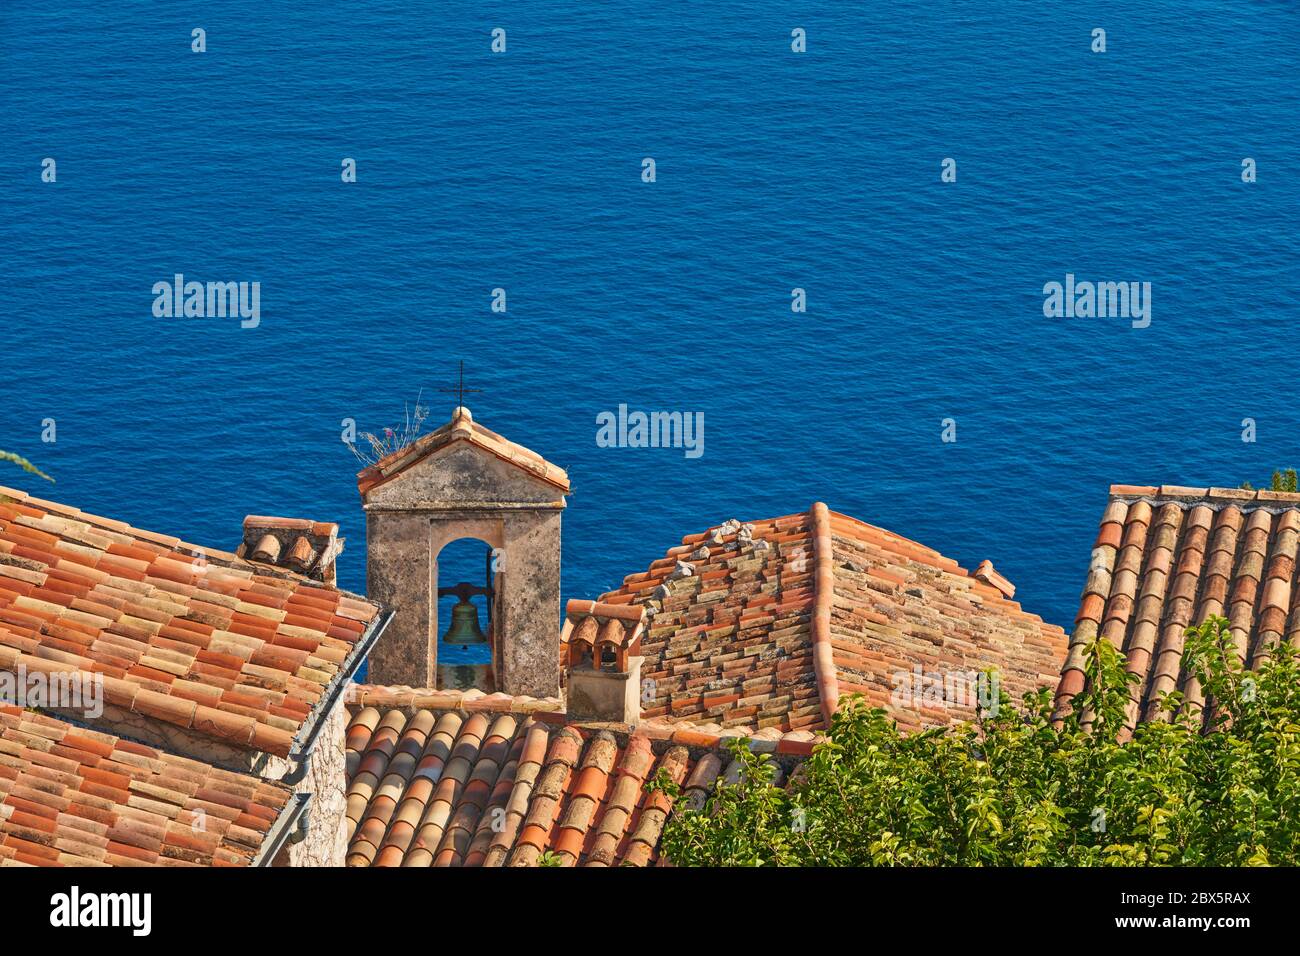 Terra cotta tile rooftops and bell tower of the Village of Eze with the Mediterranean Sea. French Riviera, Alpes-Maritimes (06), France Stock Photo